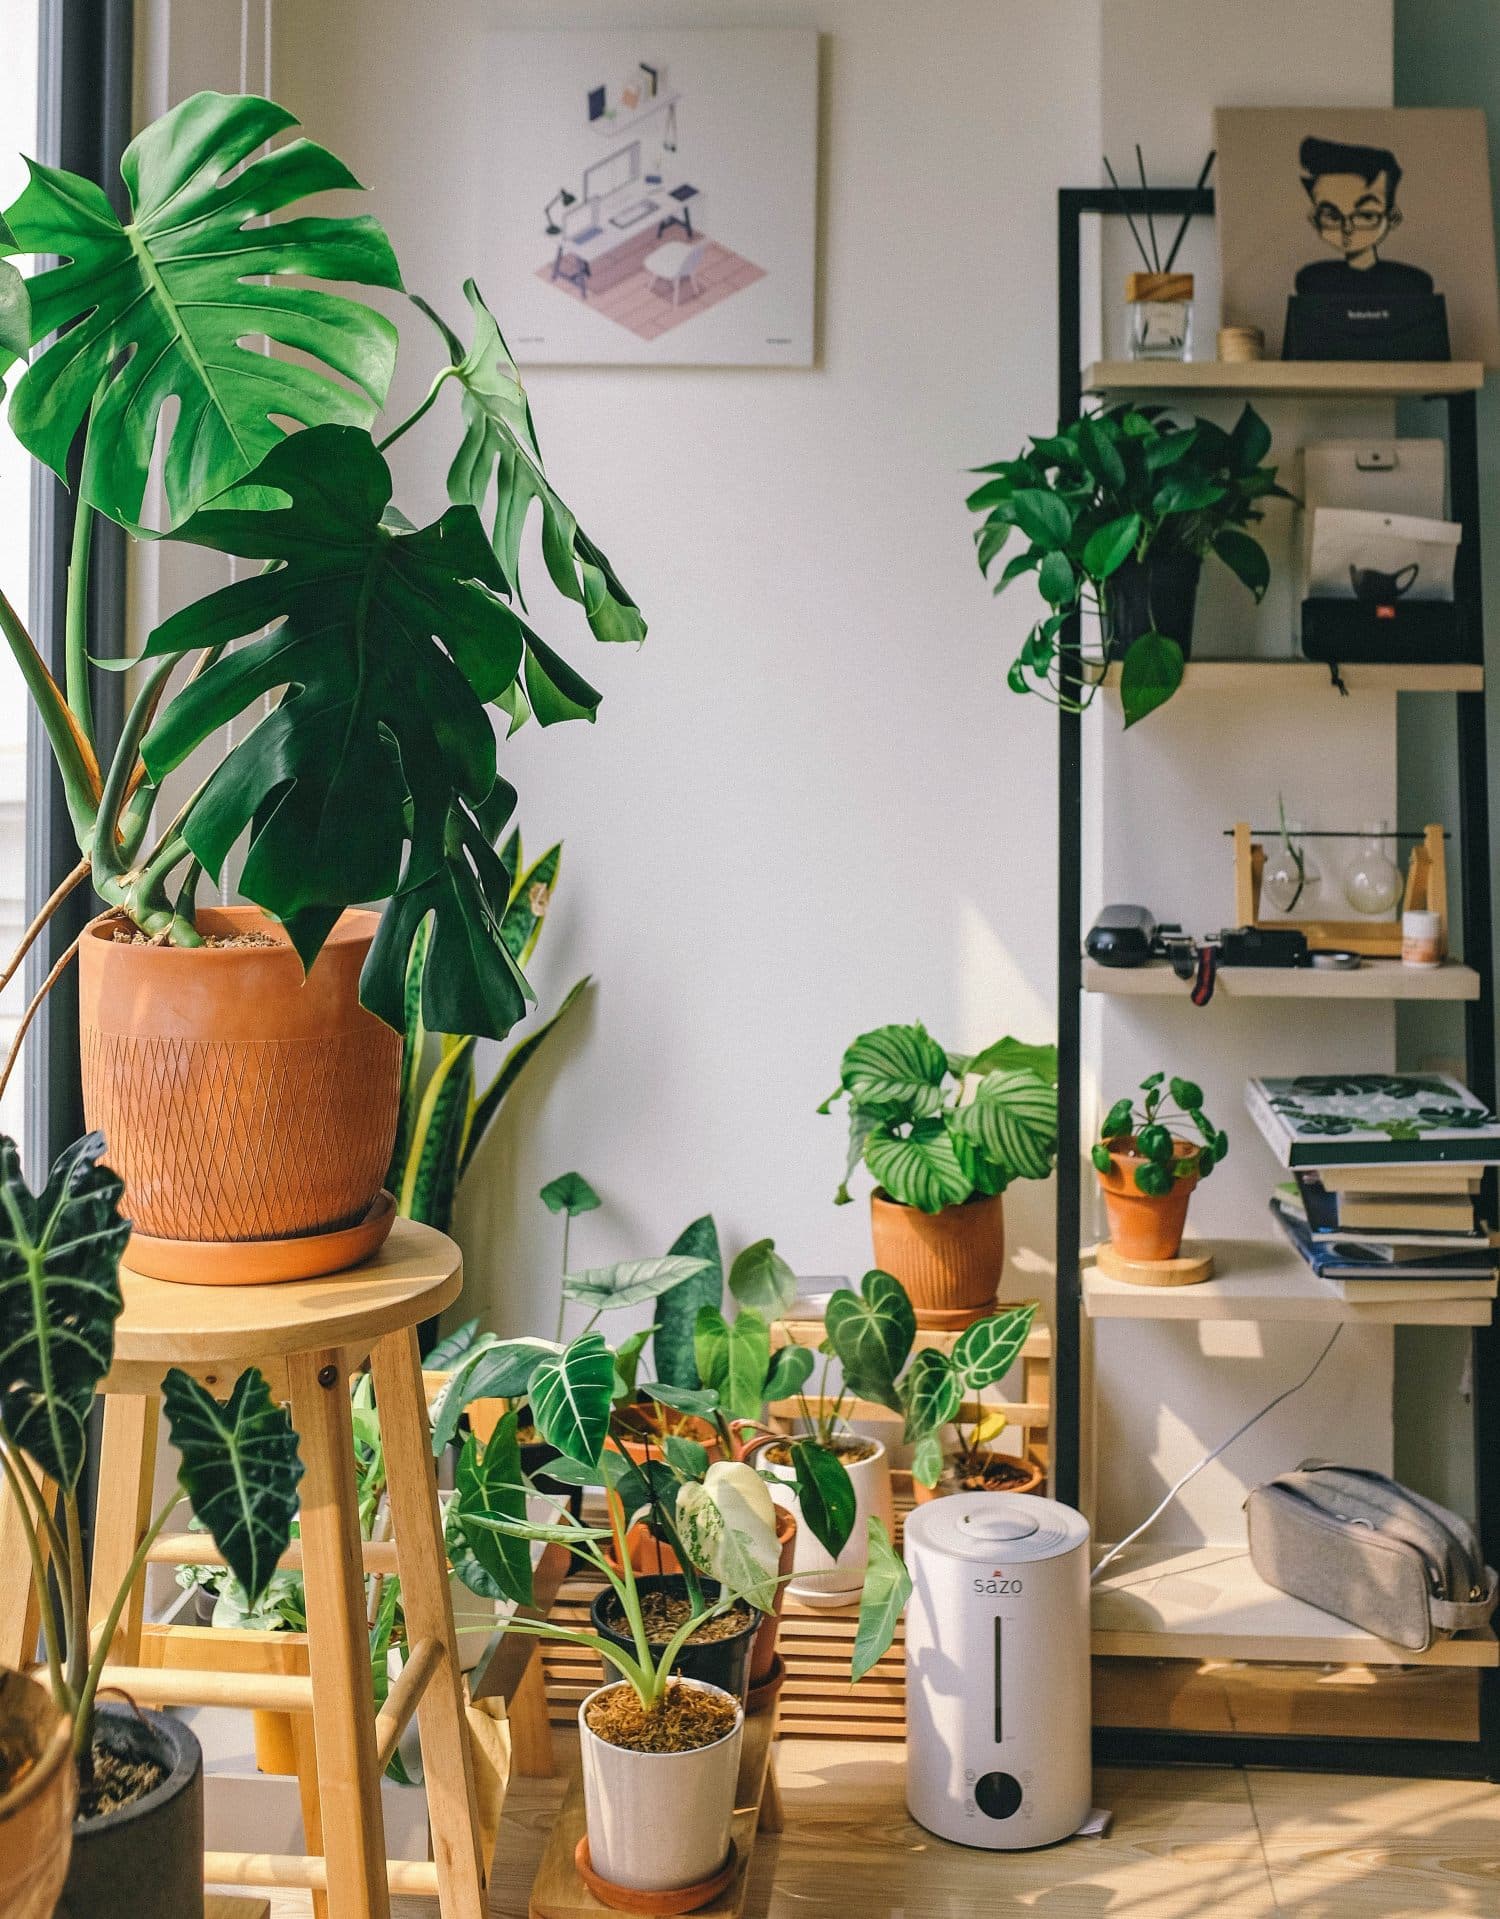 A room filled with various plants and a shelf holding more greenery.